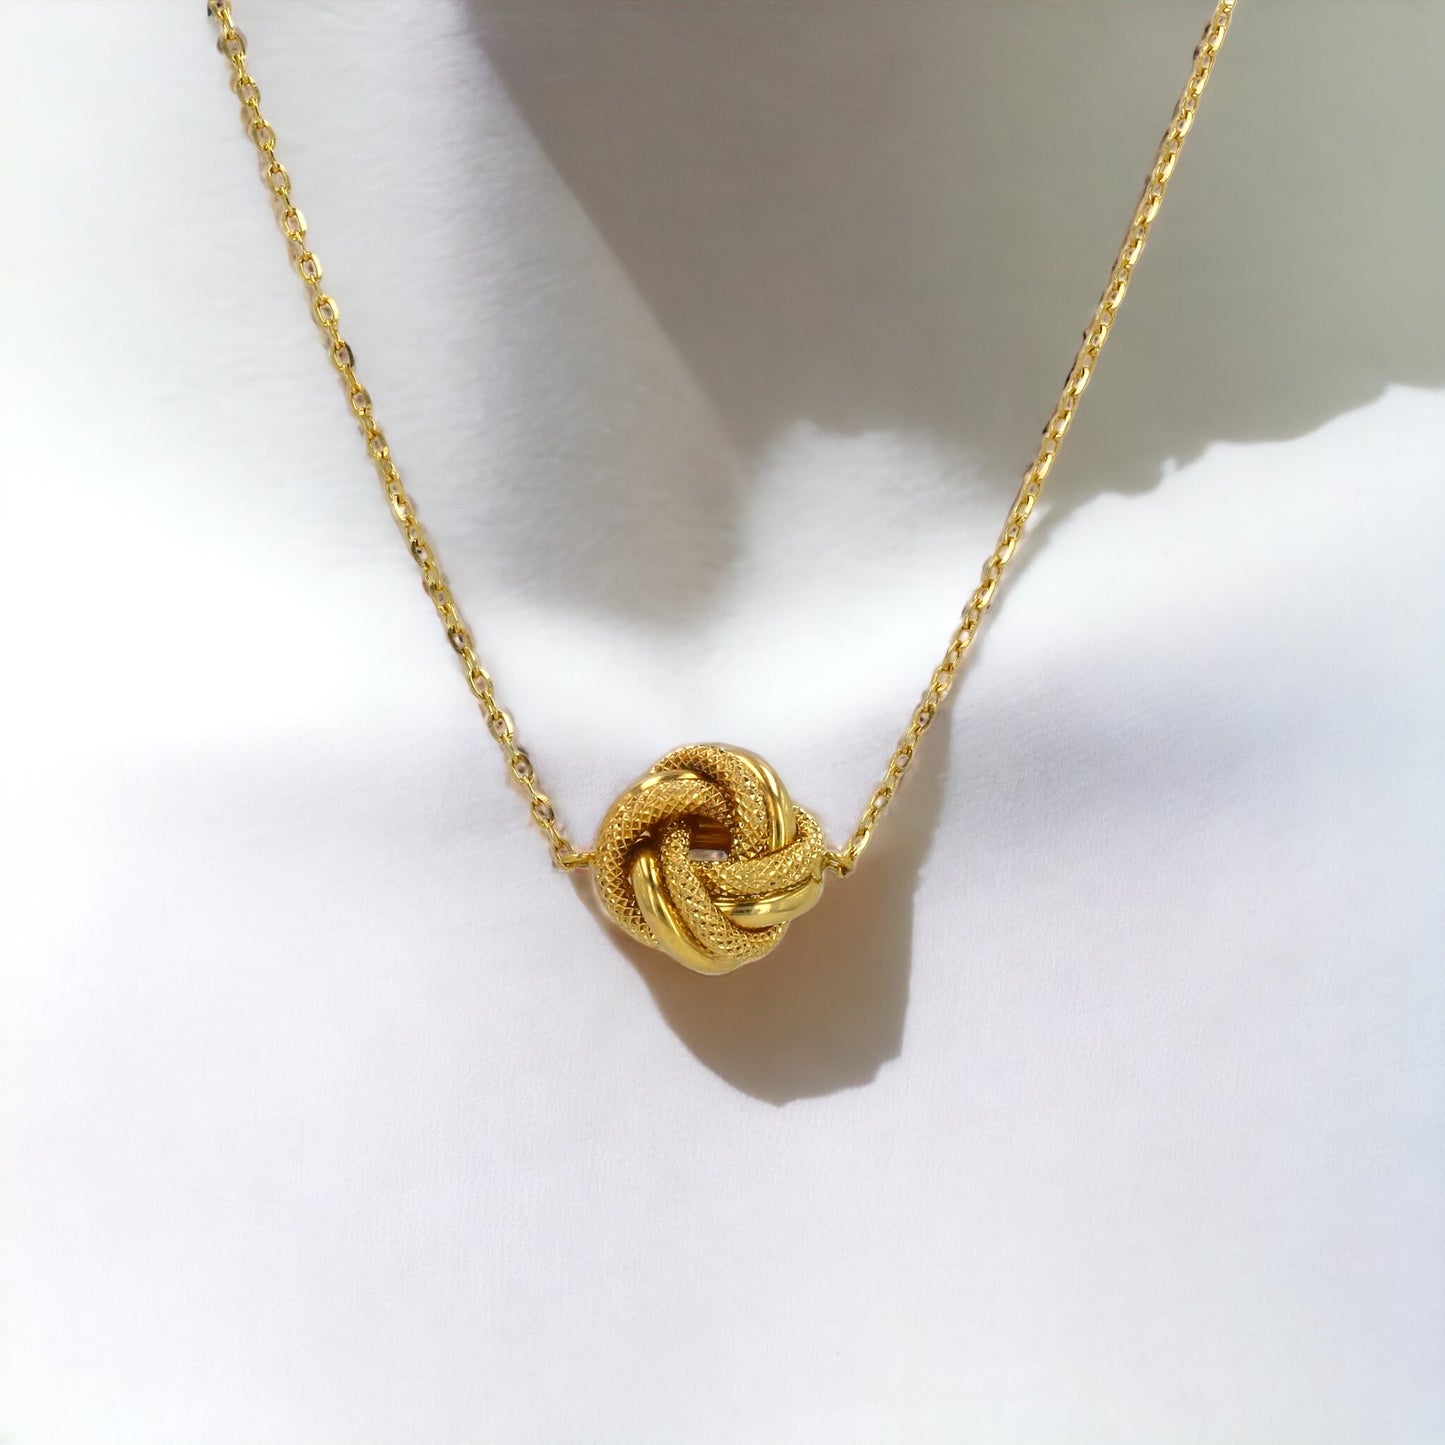 10K Yellow gold love knot necklace